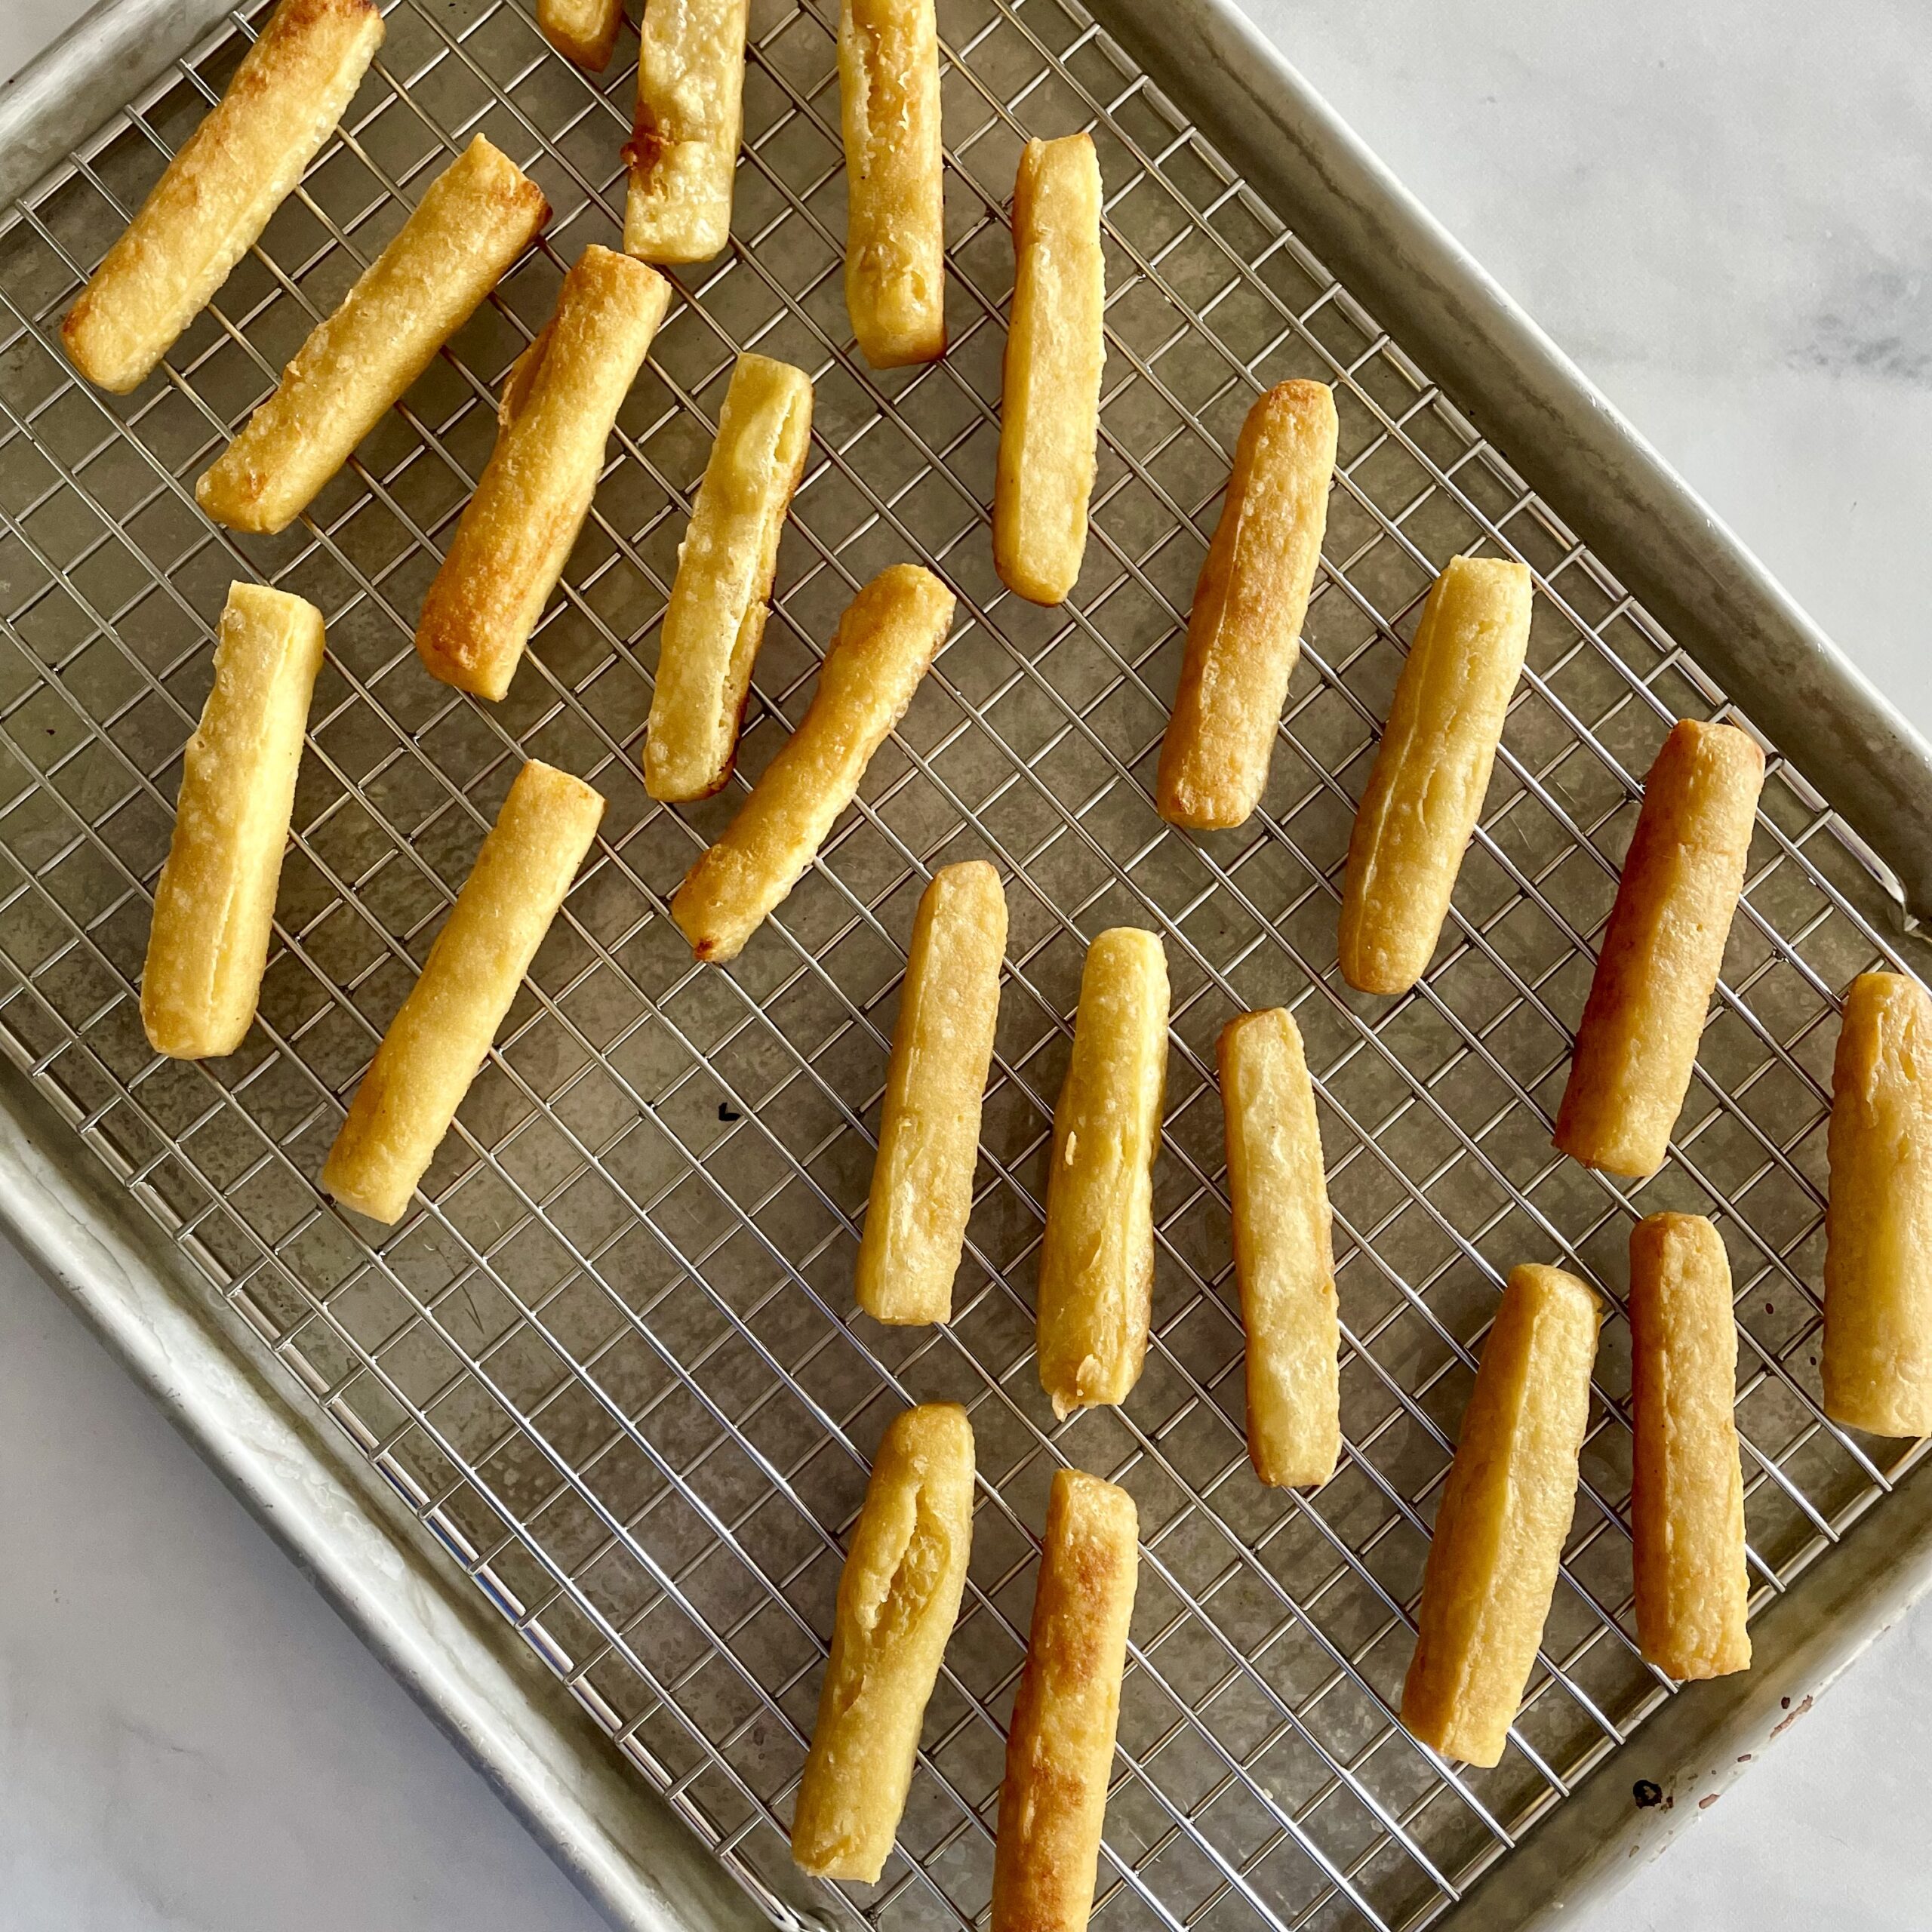 chickpea fries draining on wire rack set on a baking pan on marble surface